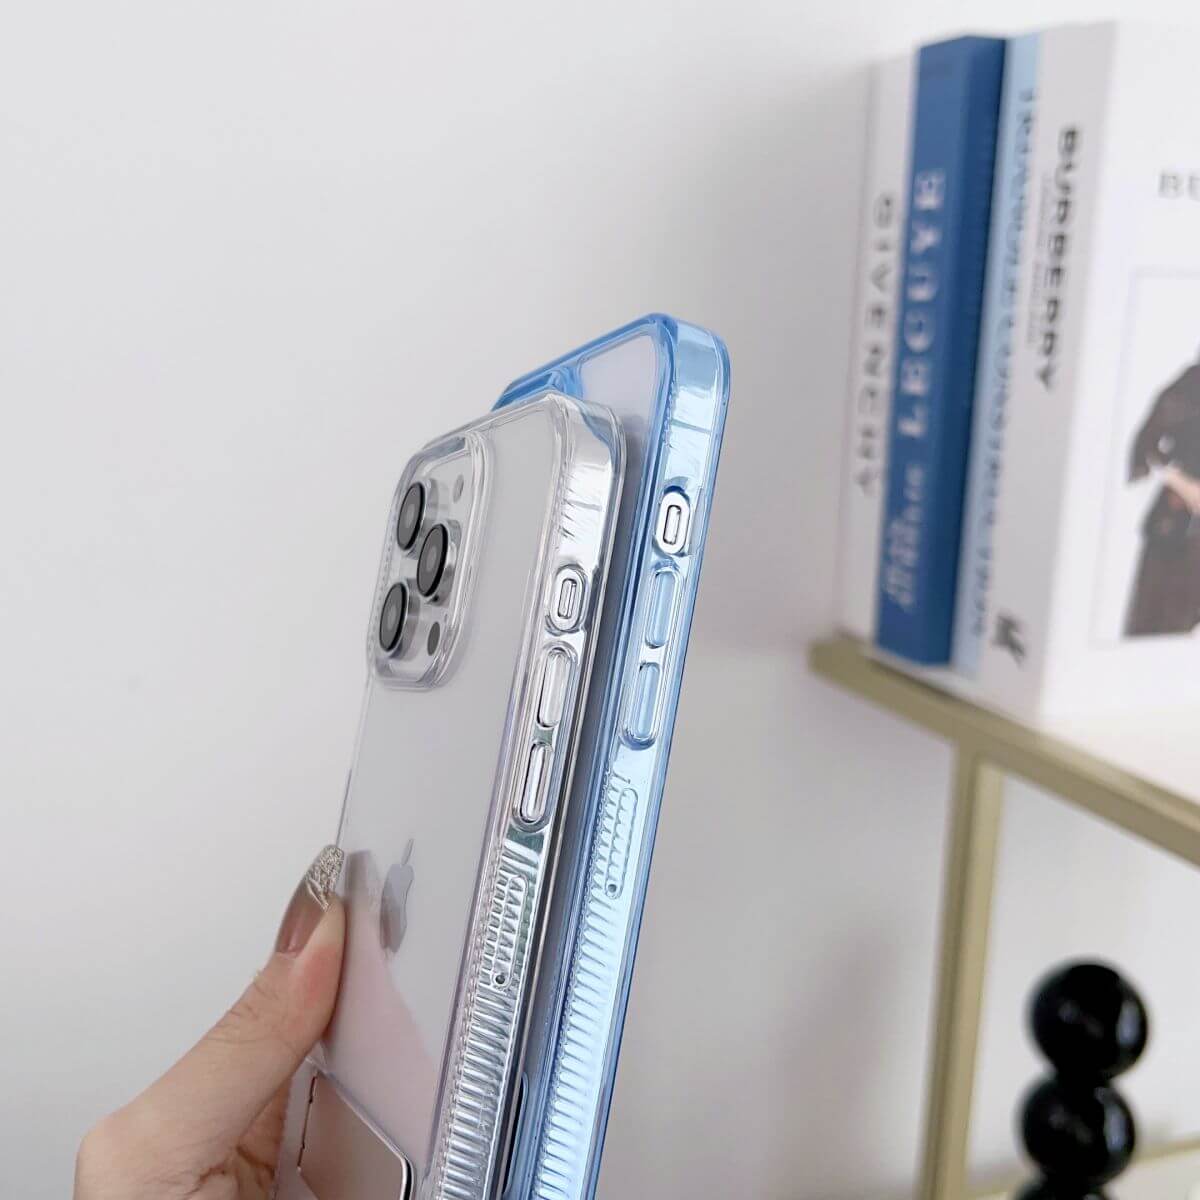 iPhone 12/12 Pro Stand Case Crystal Clear | Hugmie